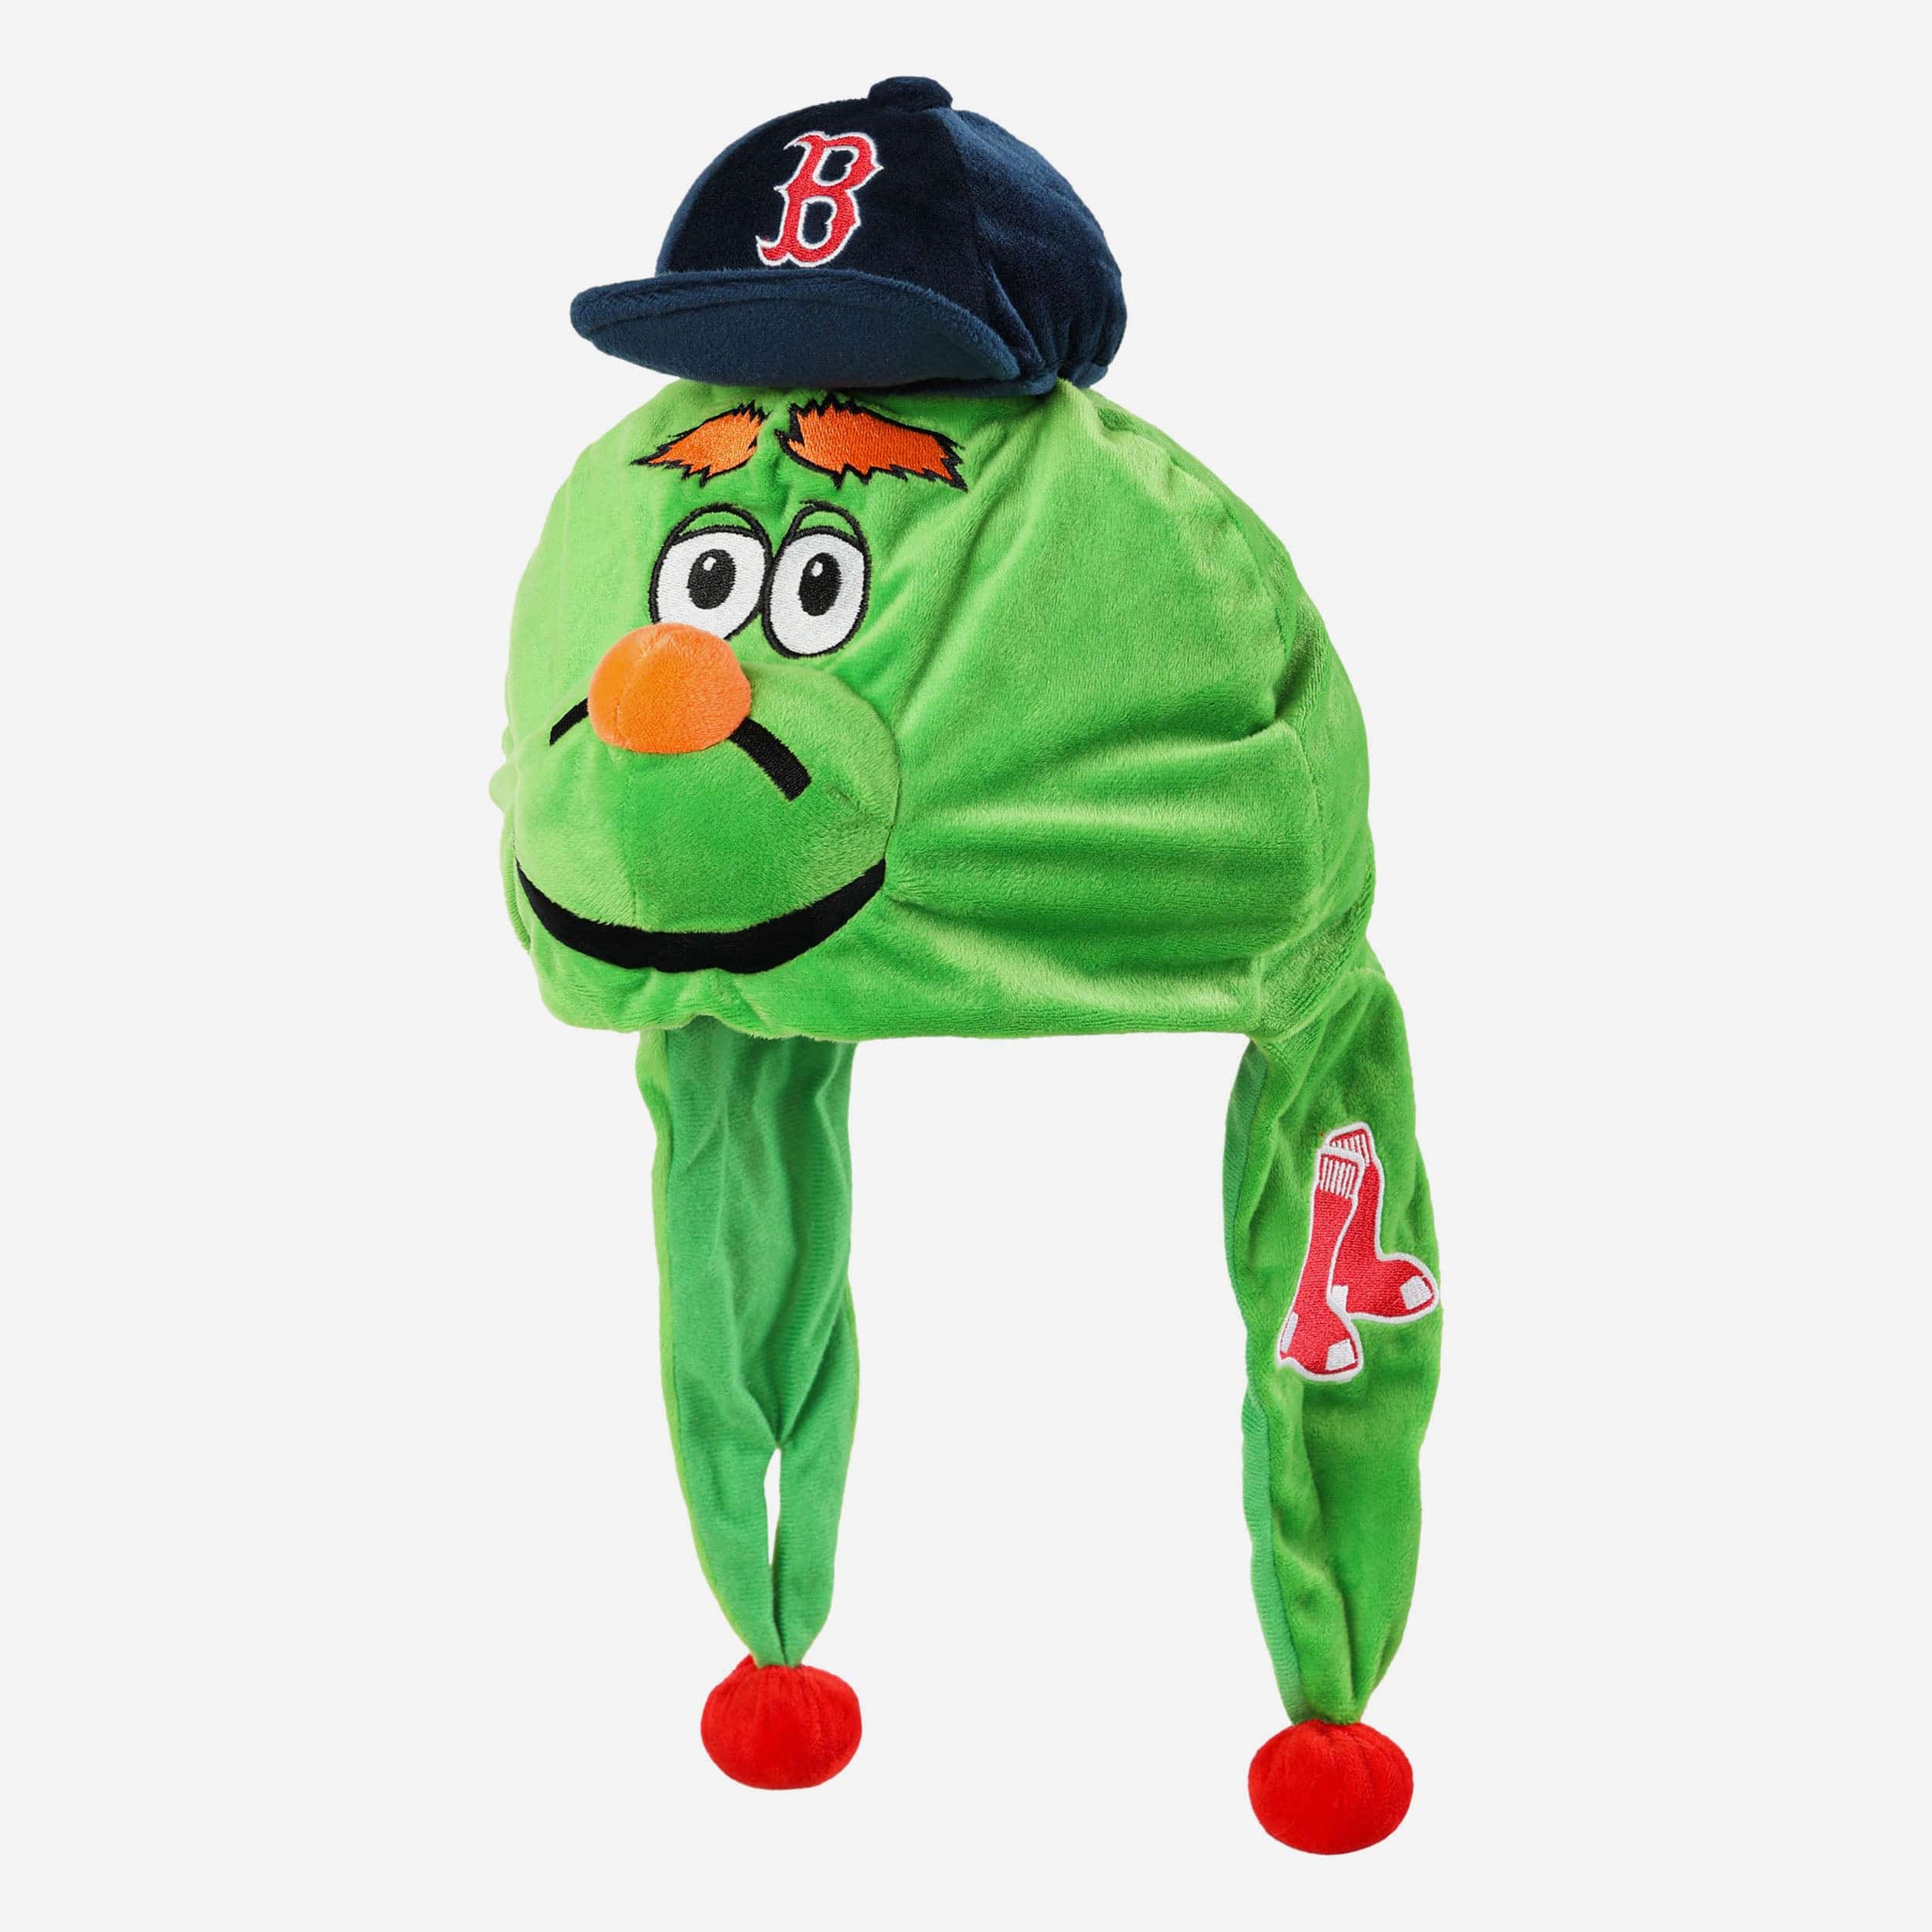 Wally The Green Monster Boston Red Sox Mascot Plush Hat